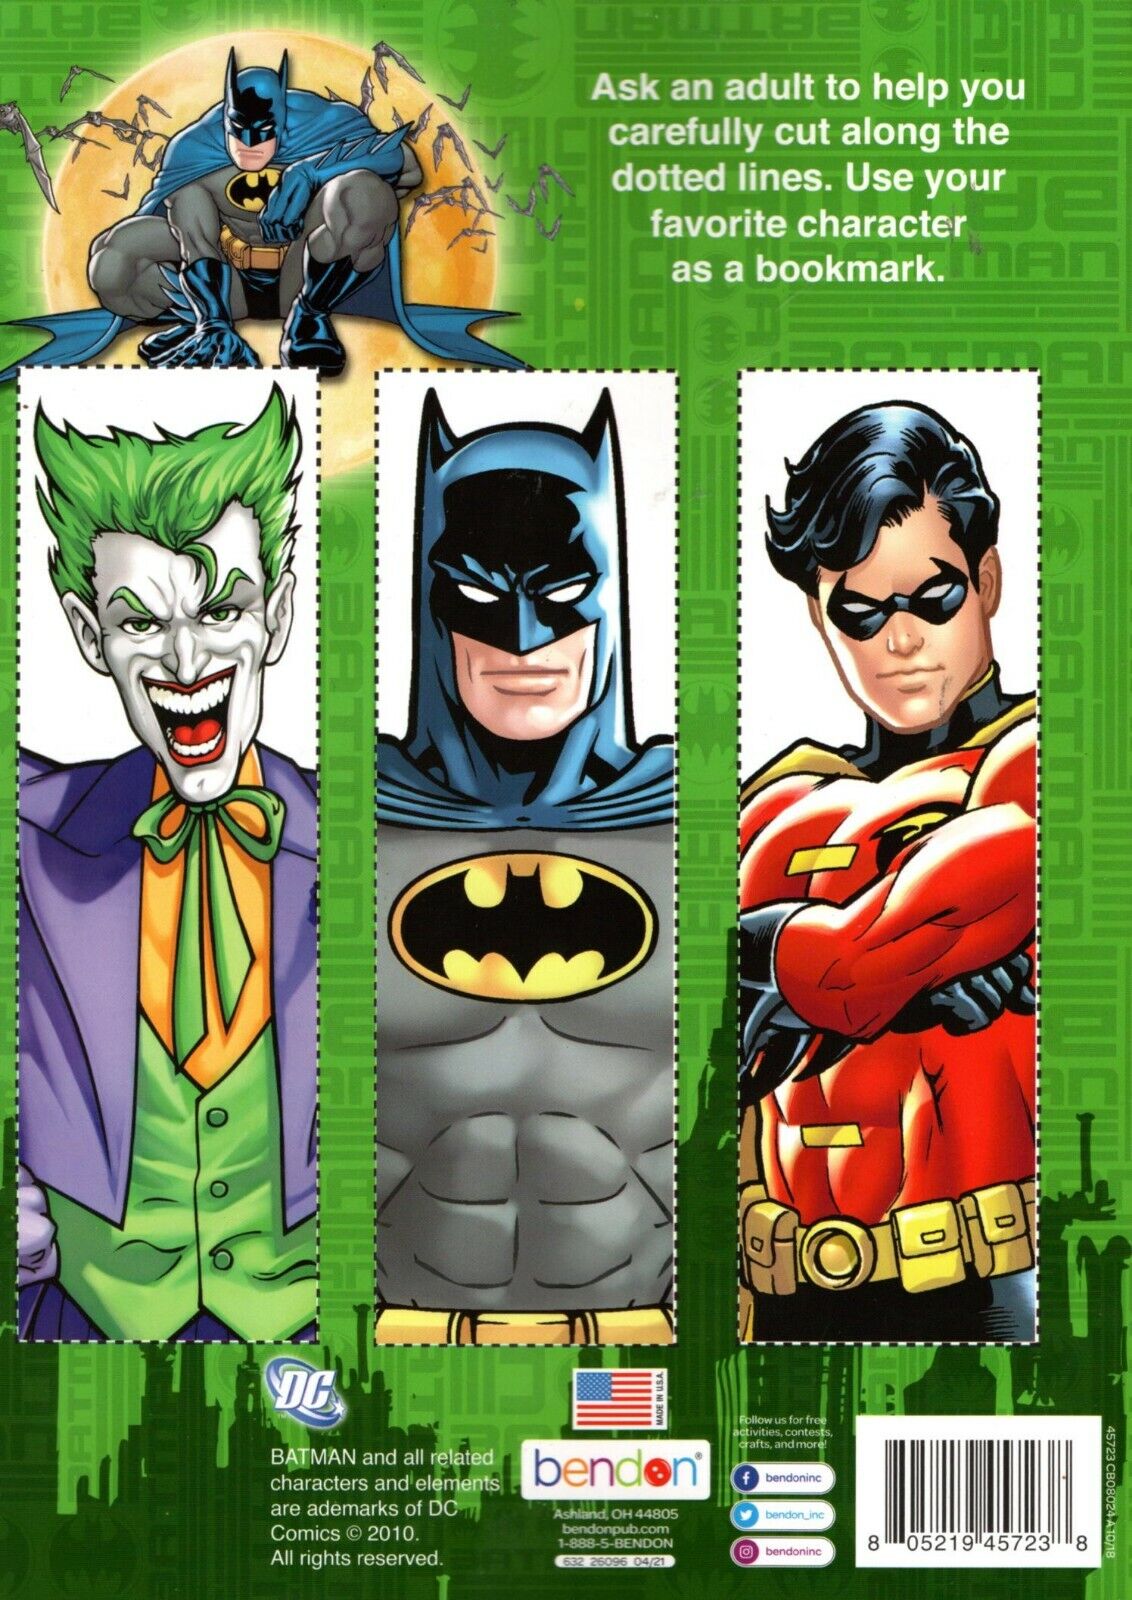 Jumbo Coloring & Activity Book Includes Bookmarks on back cover. - Batman